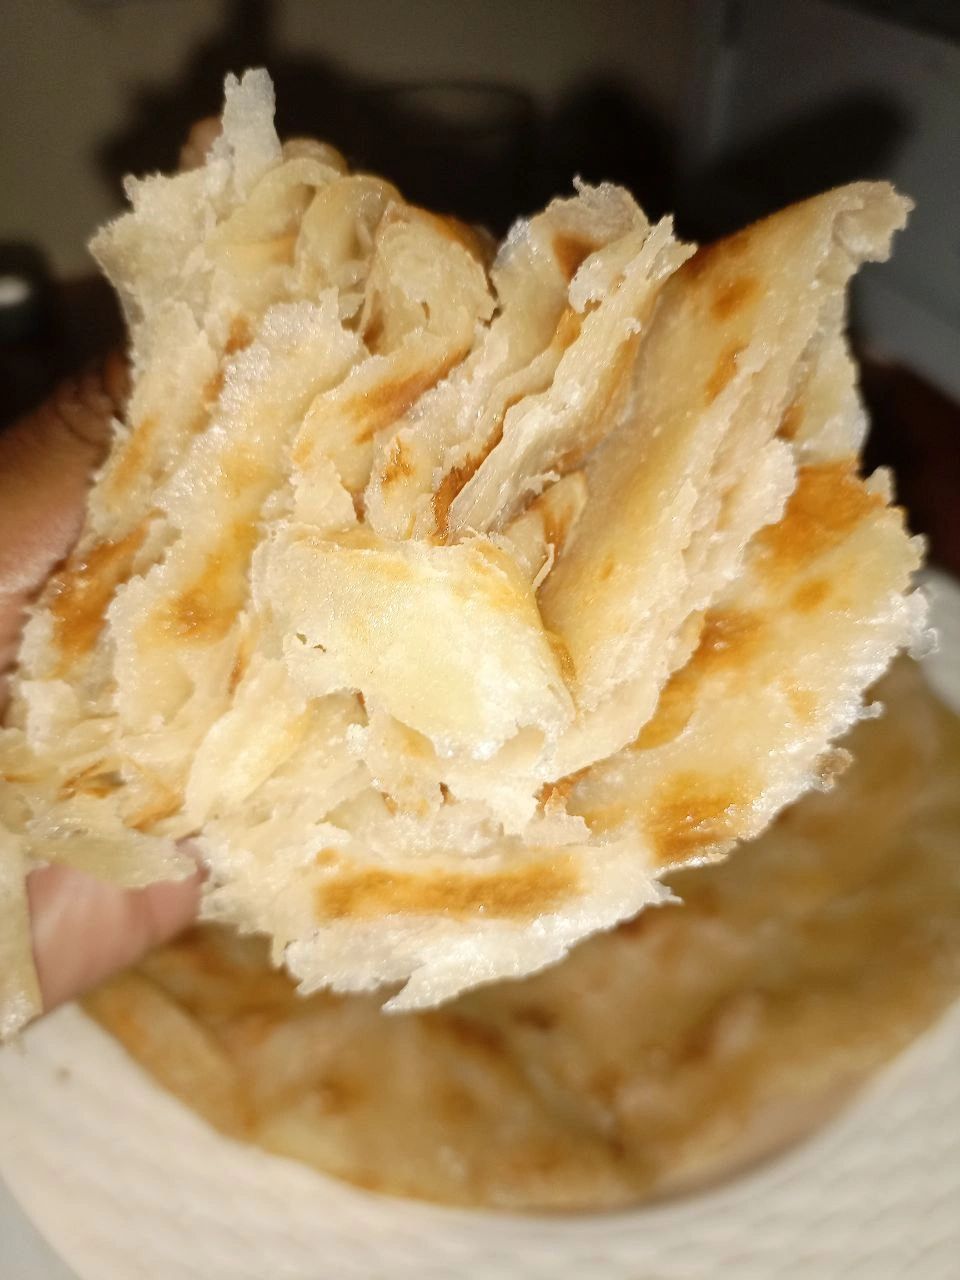 Cross section of chapati, flakes